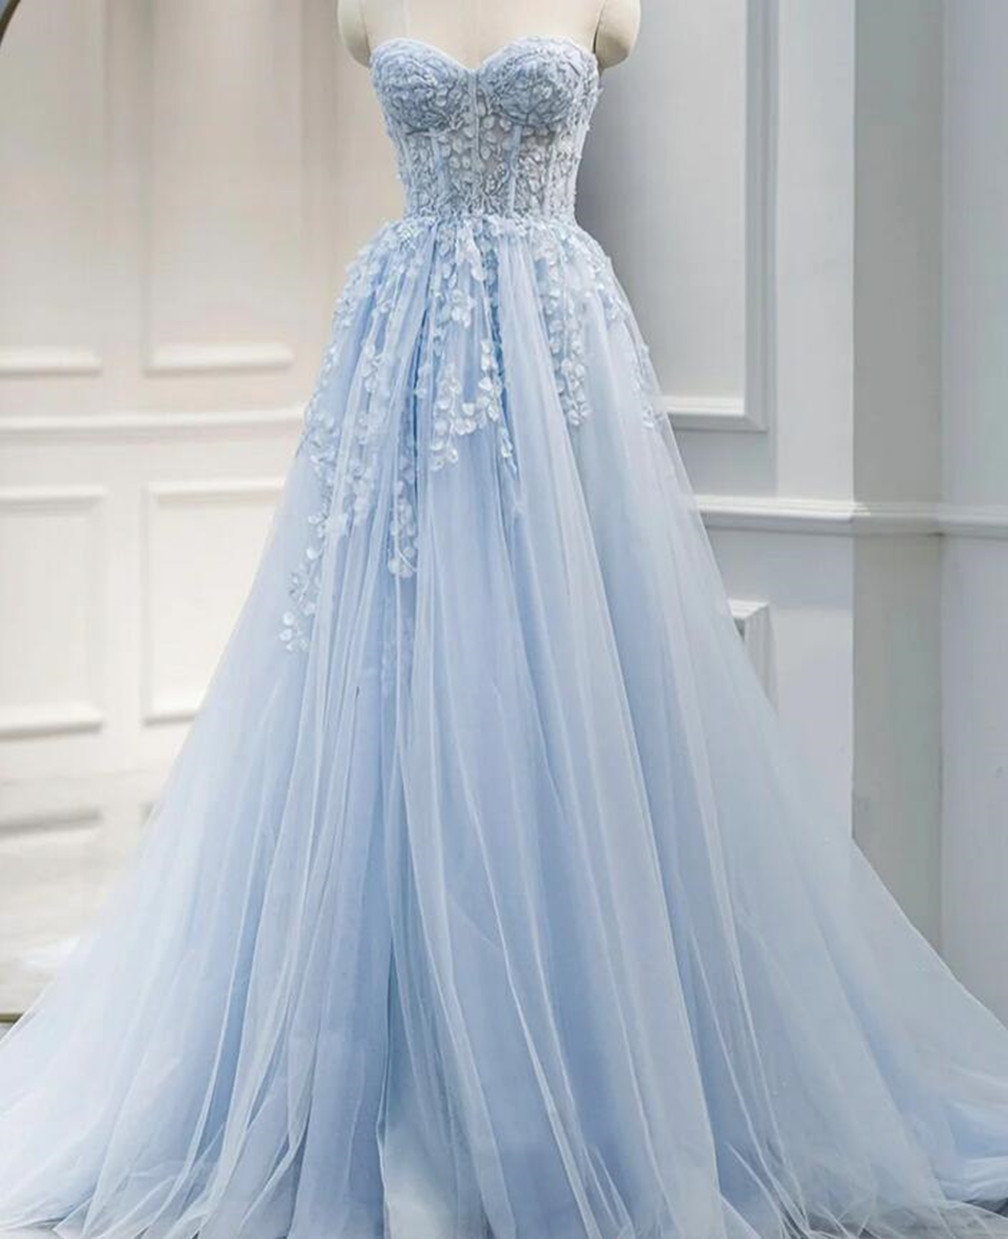 Women A-line Lace Prom Dresses Long Appliques Evening Gowns Tulle Formal Party Dress Yp009